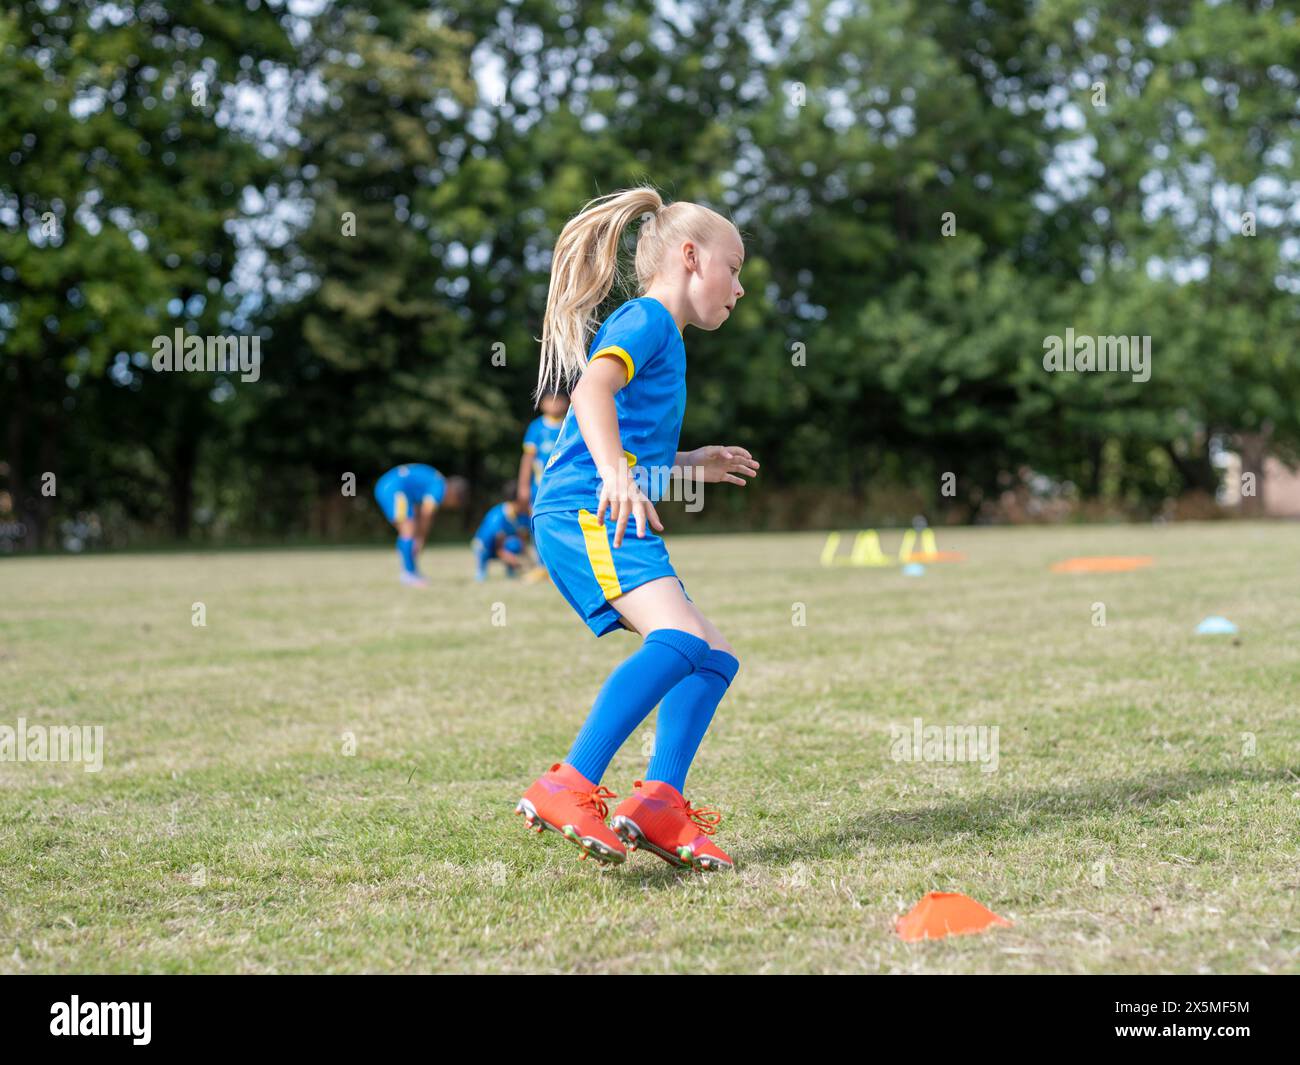 Girl (8-9) dressed in uniform practicing on soccer field Stock Photo